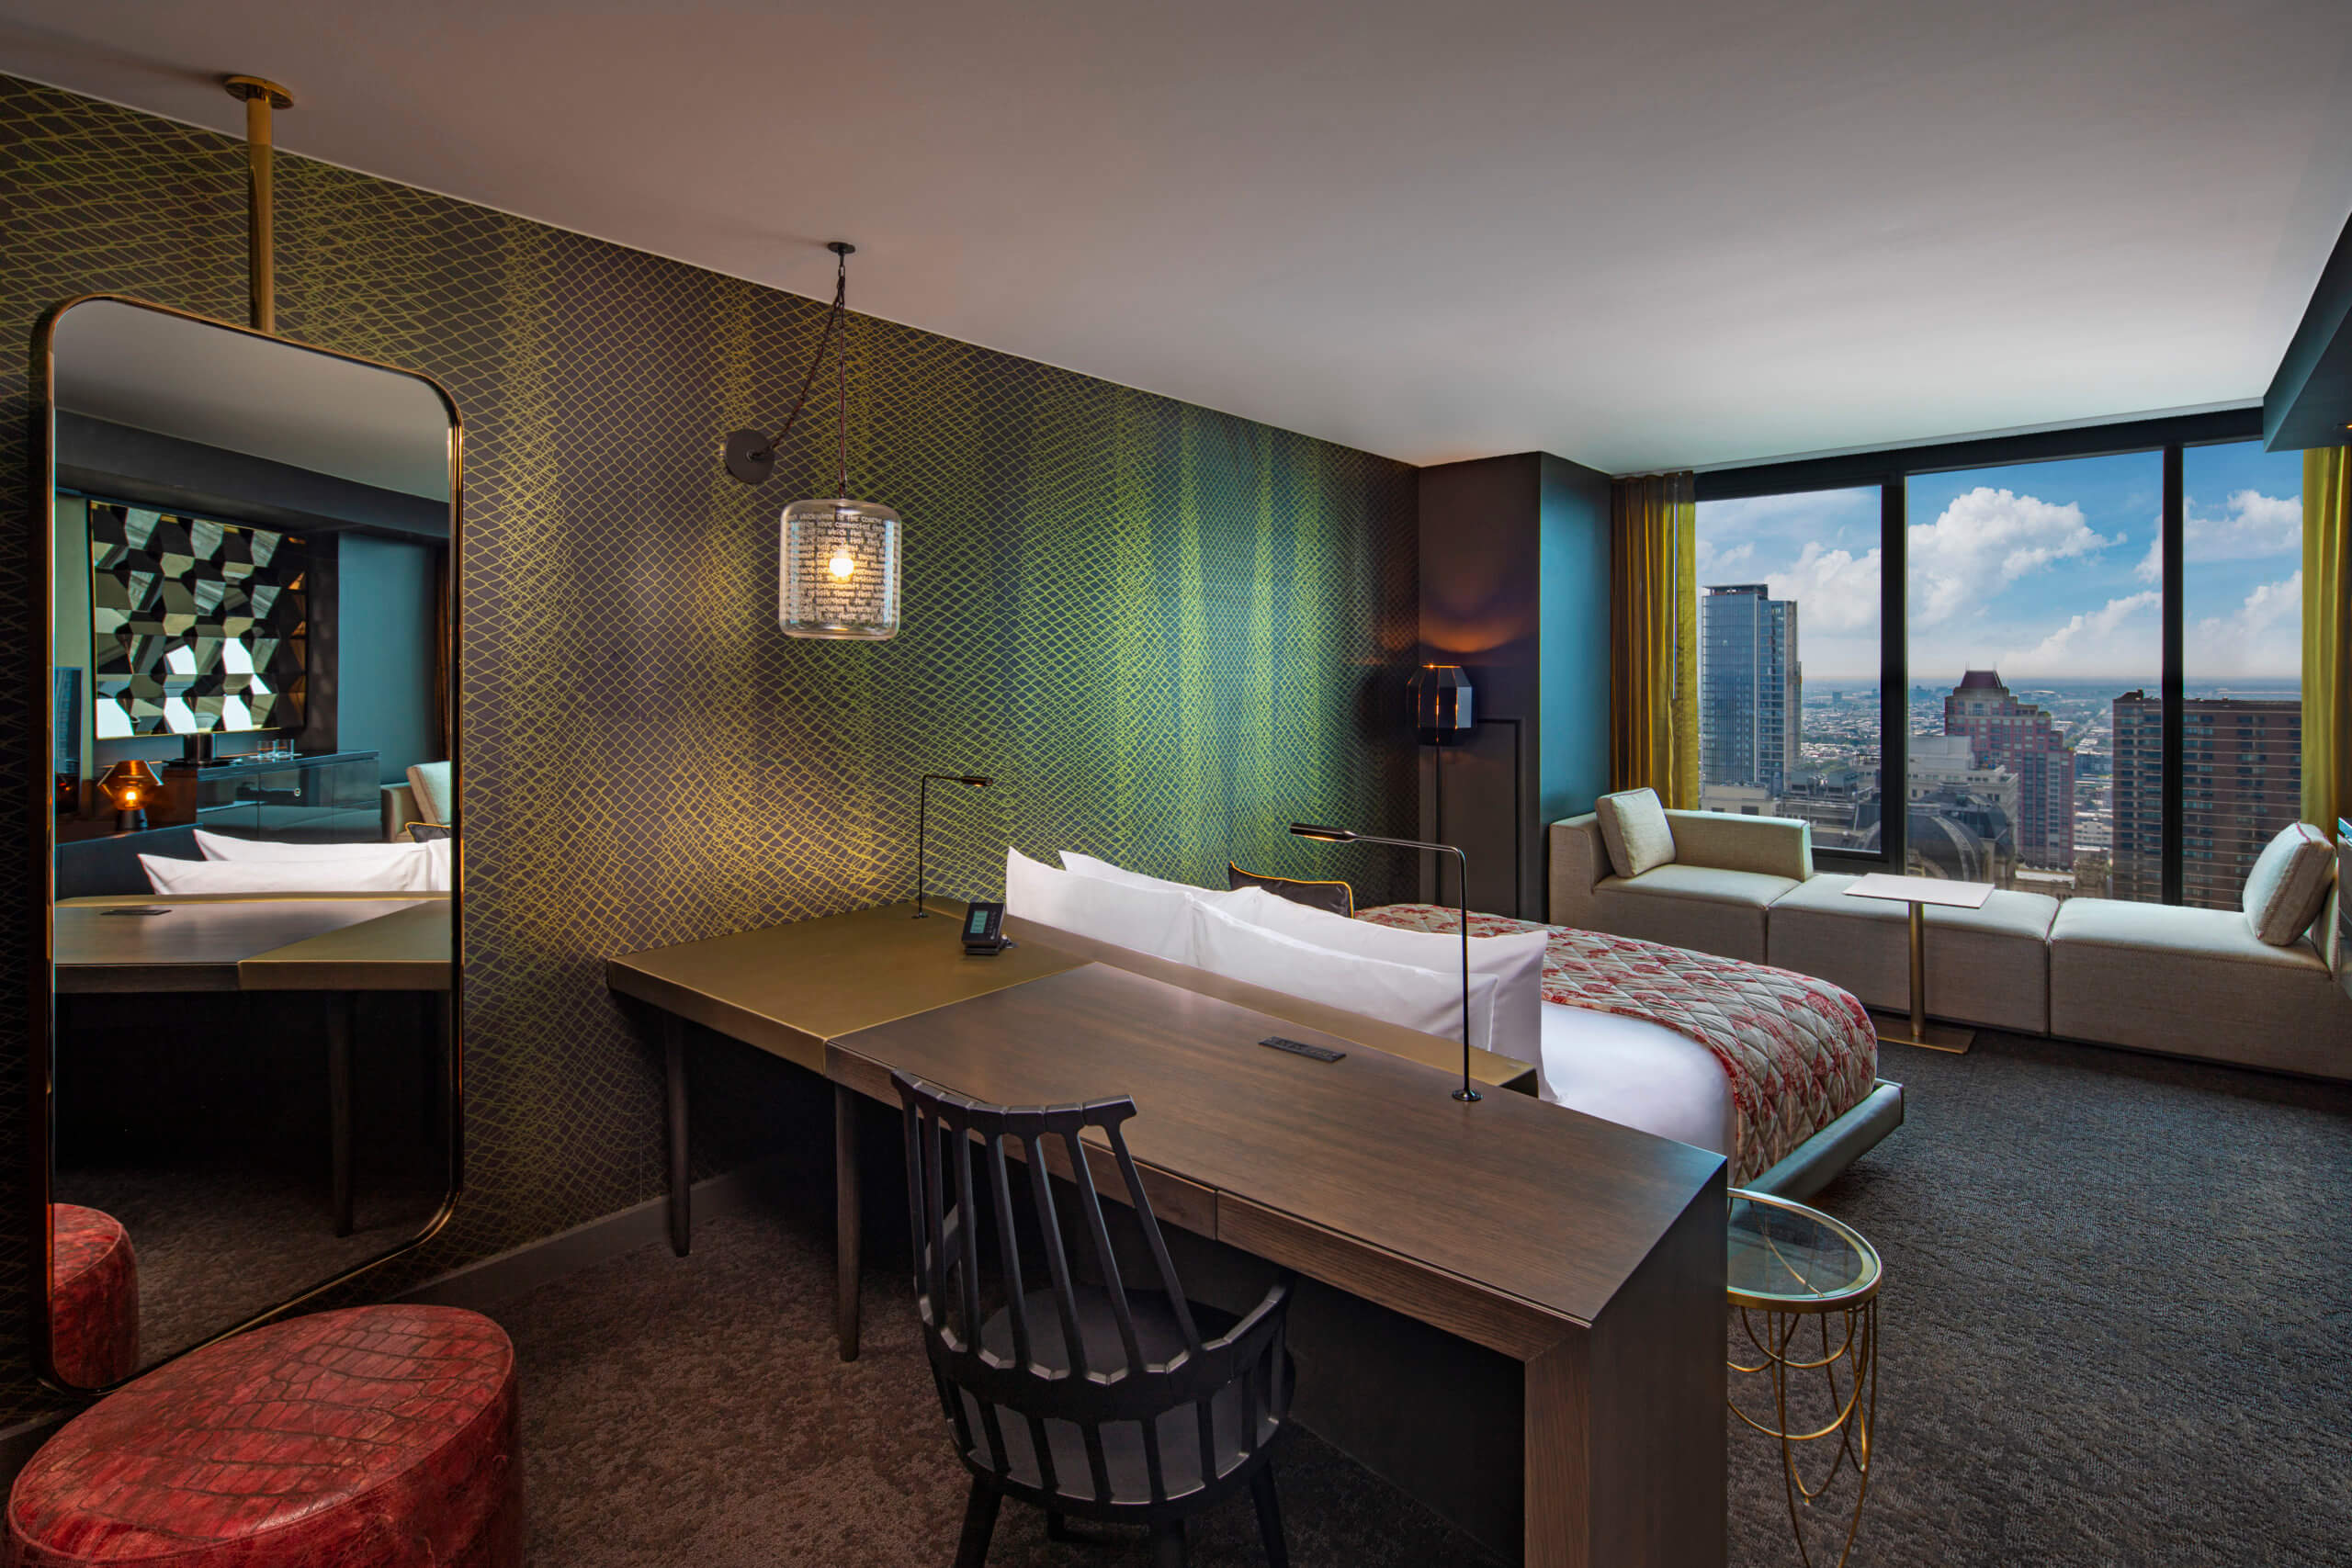 A desk sits behind a bed that faces a window, a green wall is to the left of the desk and bed inside of the hotel room